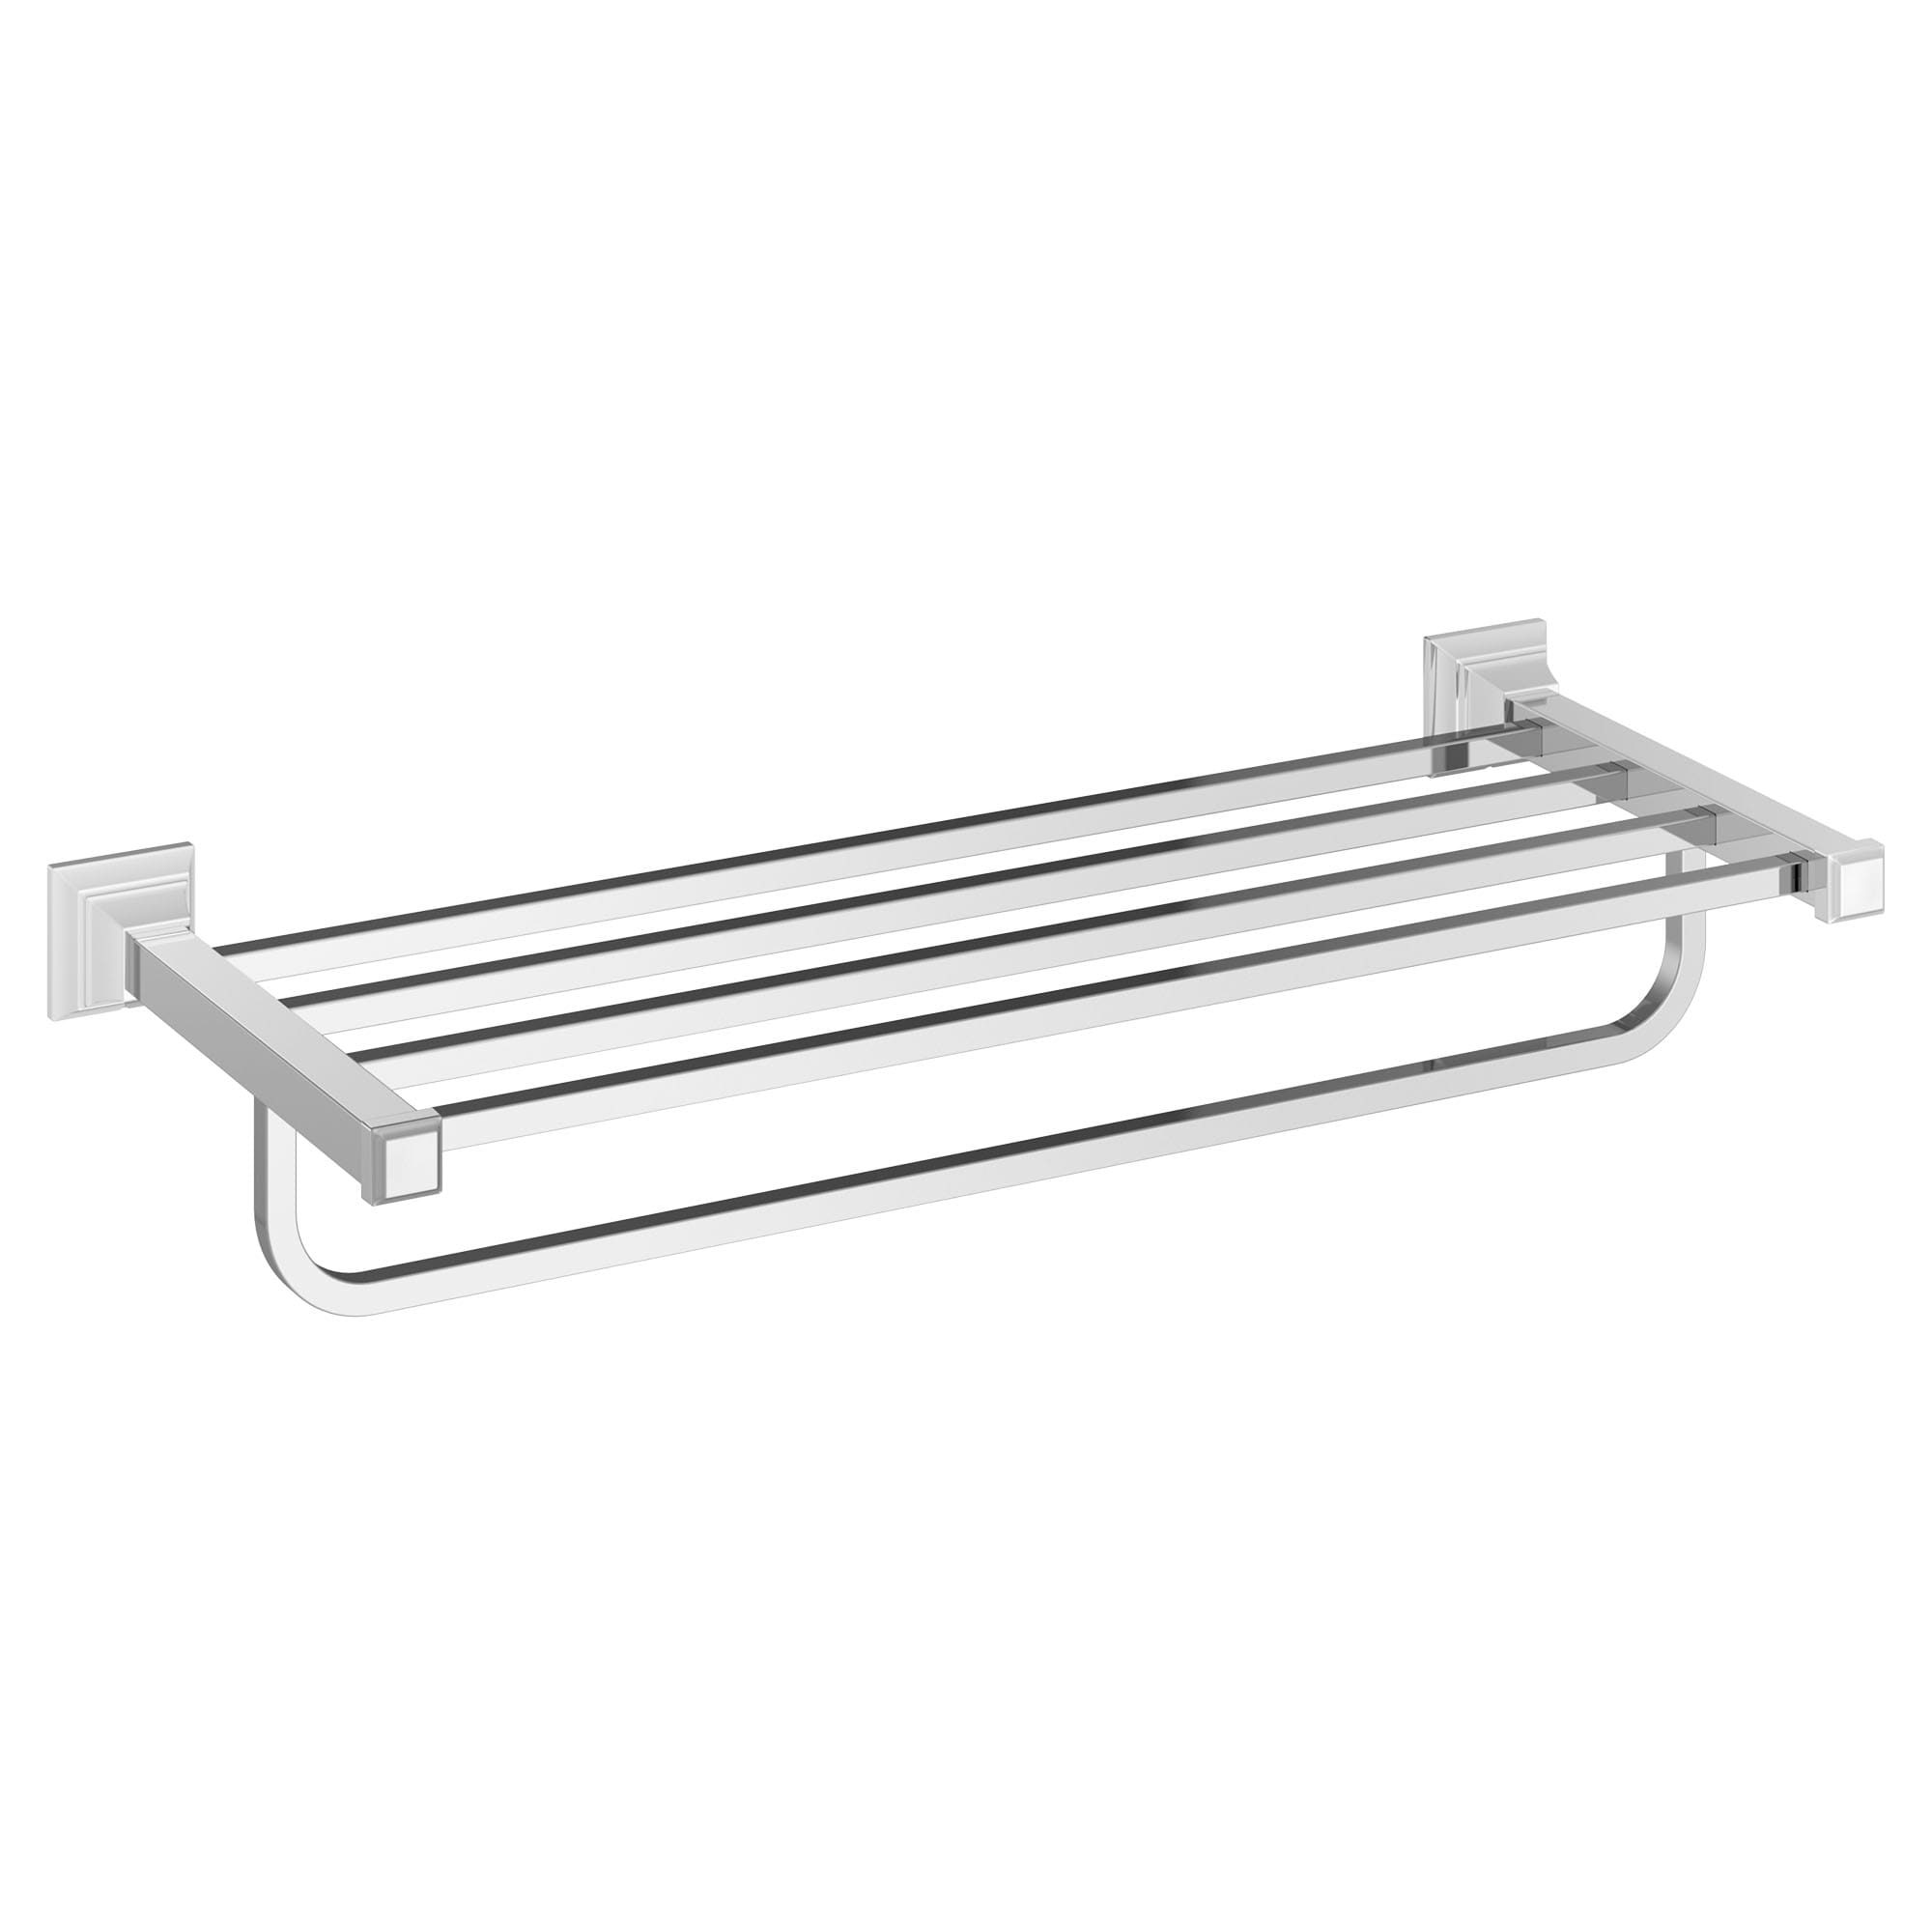 Town Square® S 24-Inch Train Rack